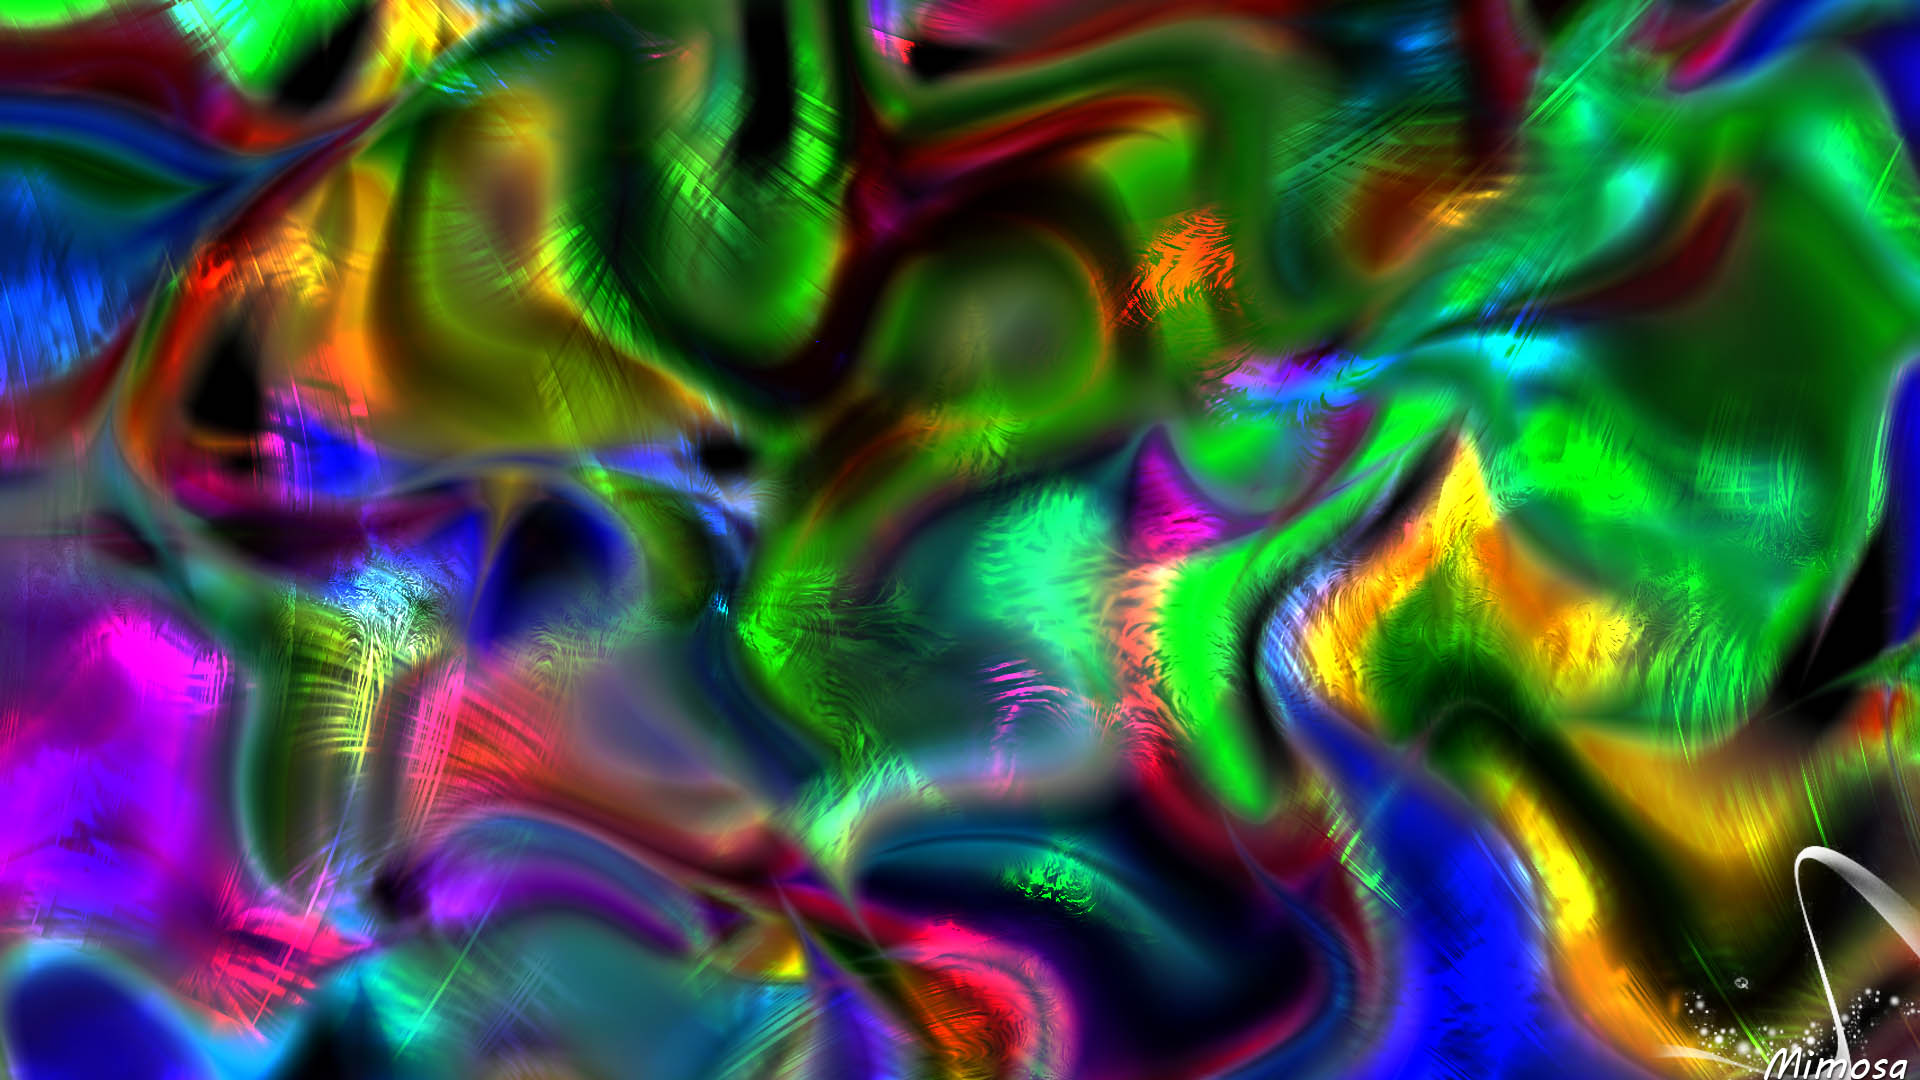 Abstract Artistic Colorful Digital Art 1920x1080